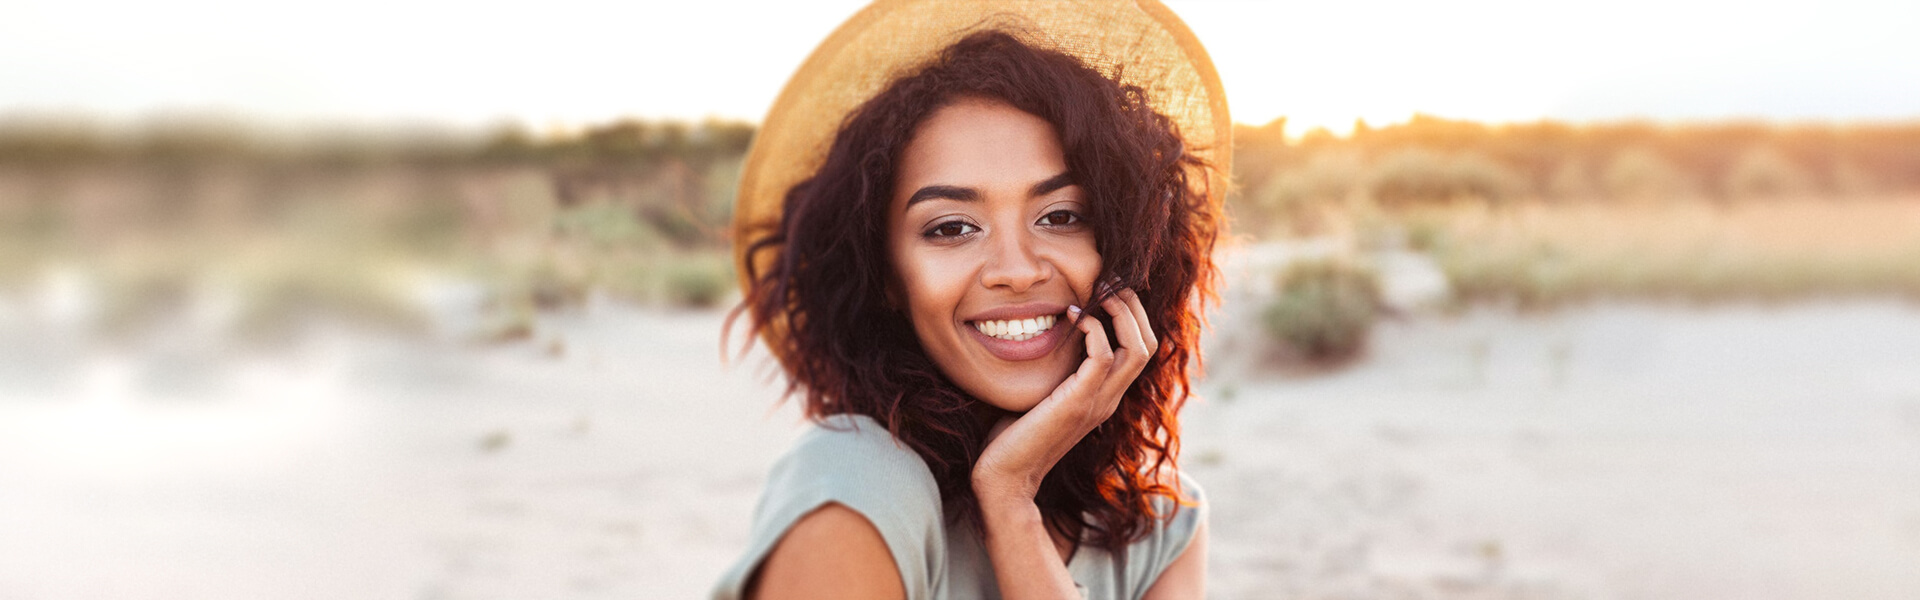 Maintaining Your Smile After Teeth Whitening Treatment Is A Challenge You Must Overcome